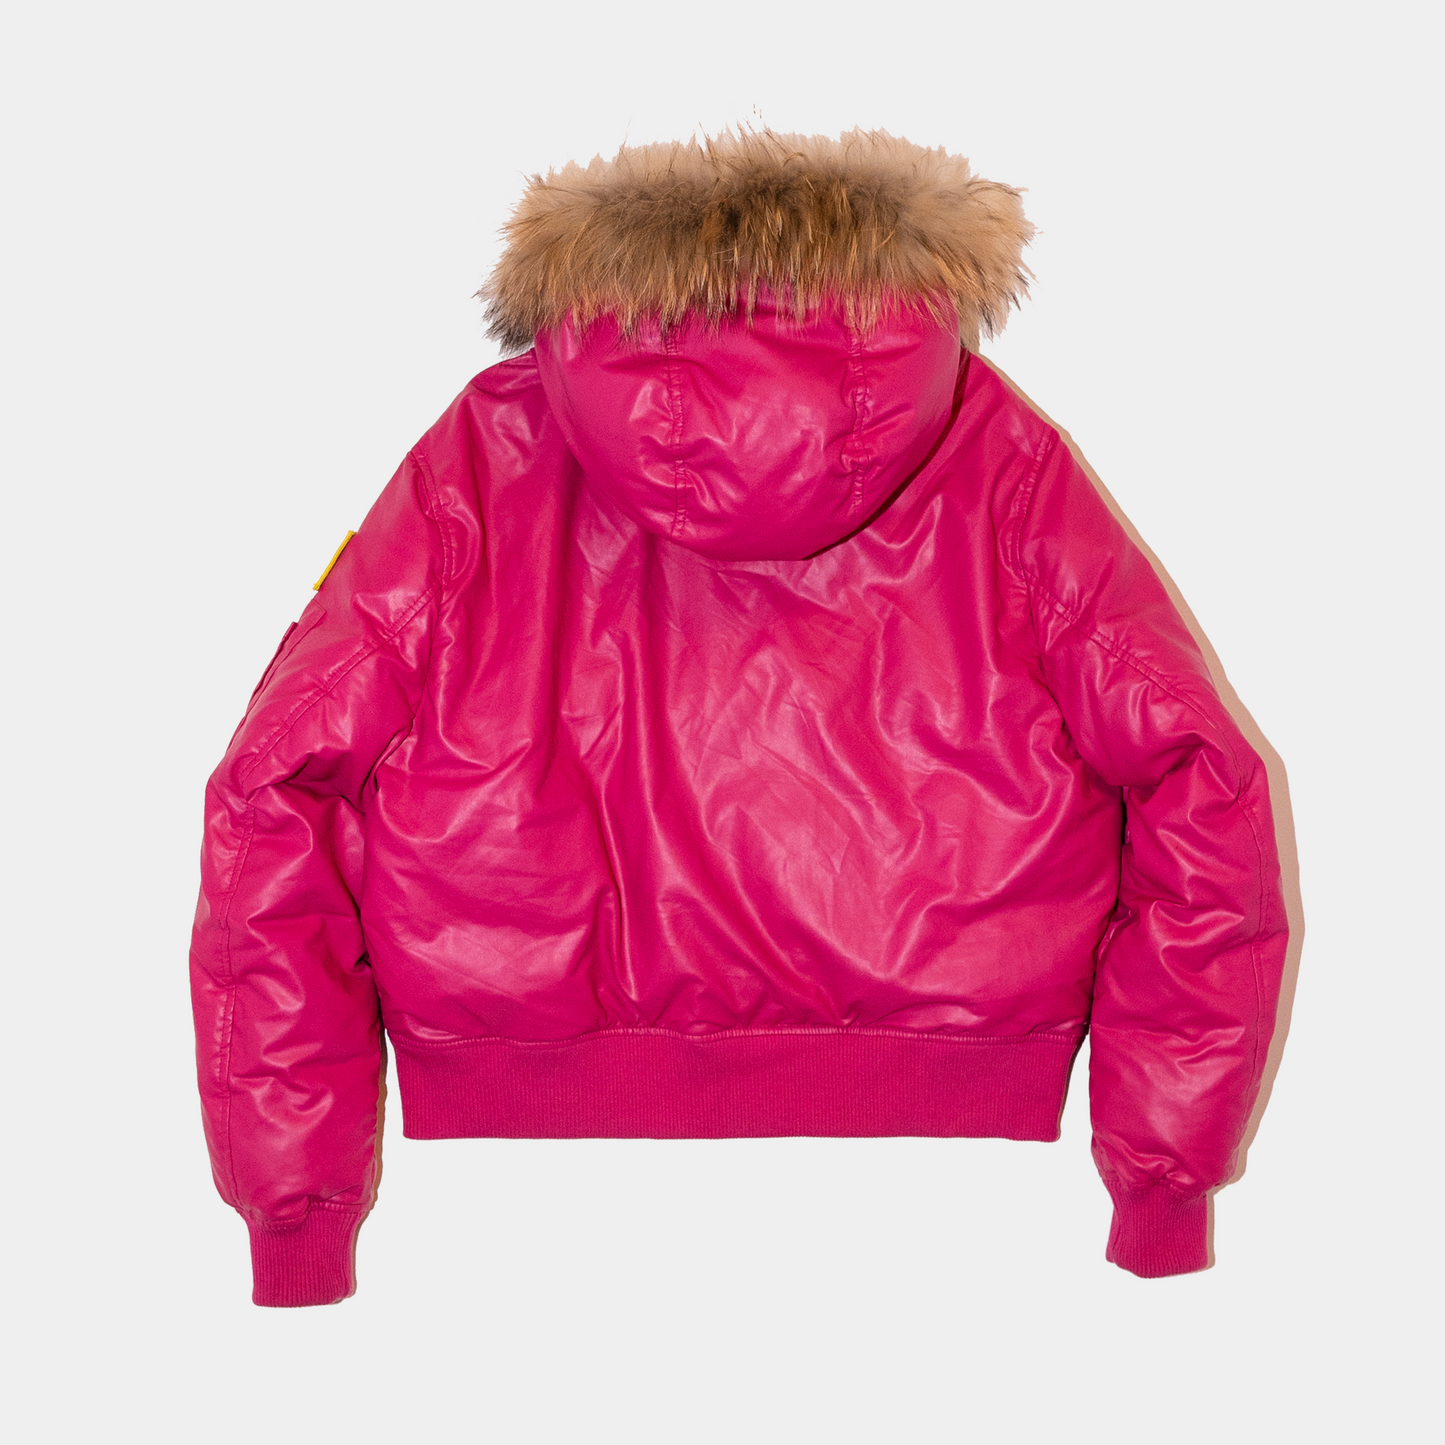 Fur Hooded Leather Bomber (Pink)